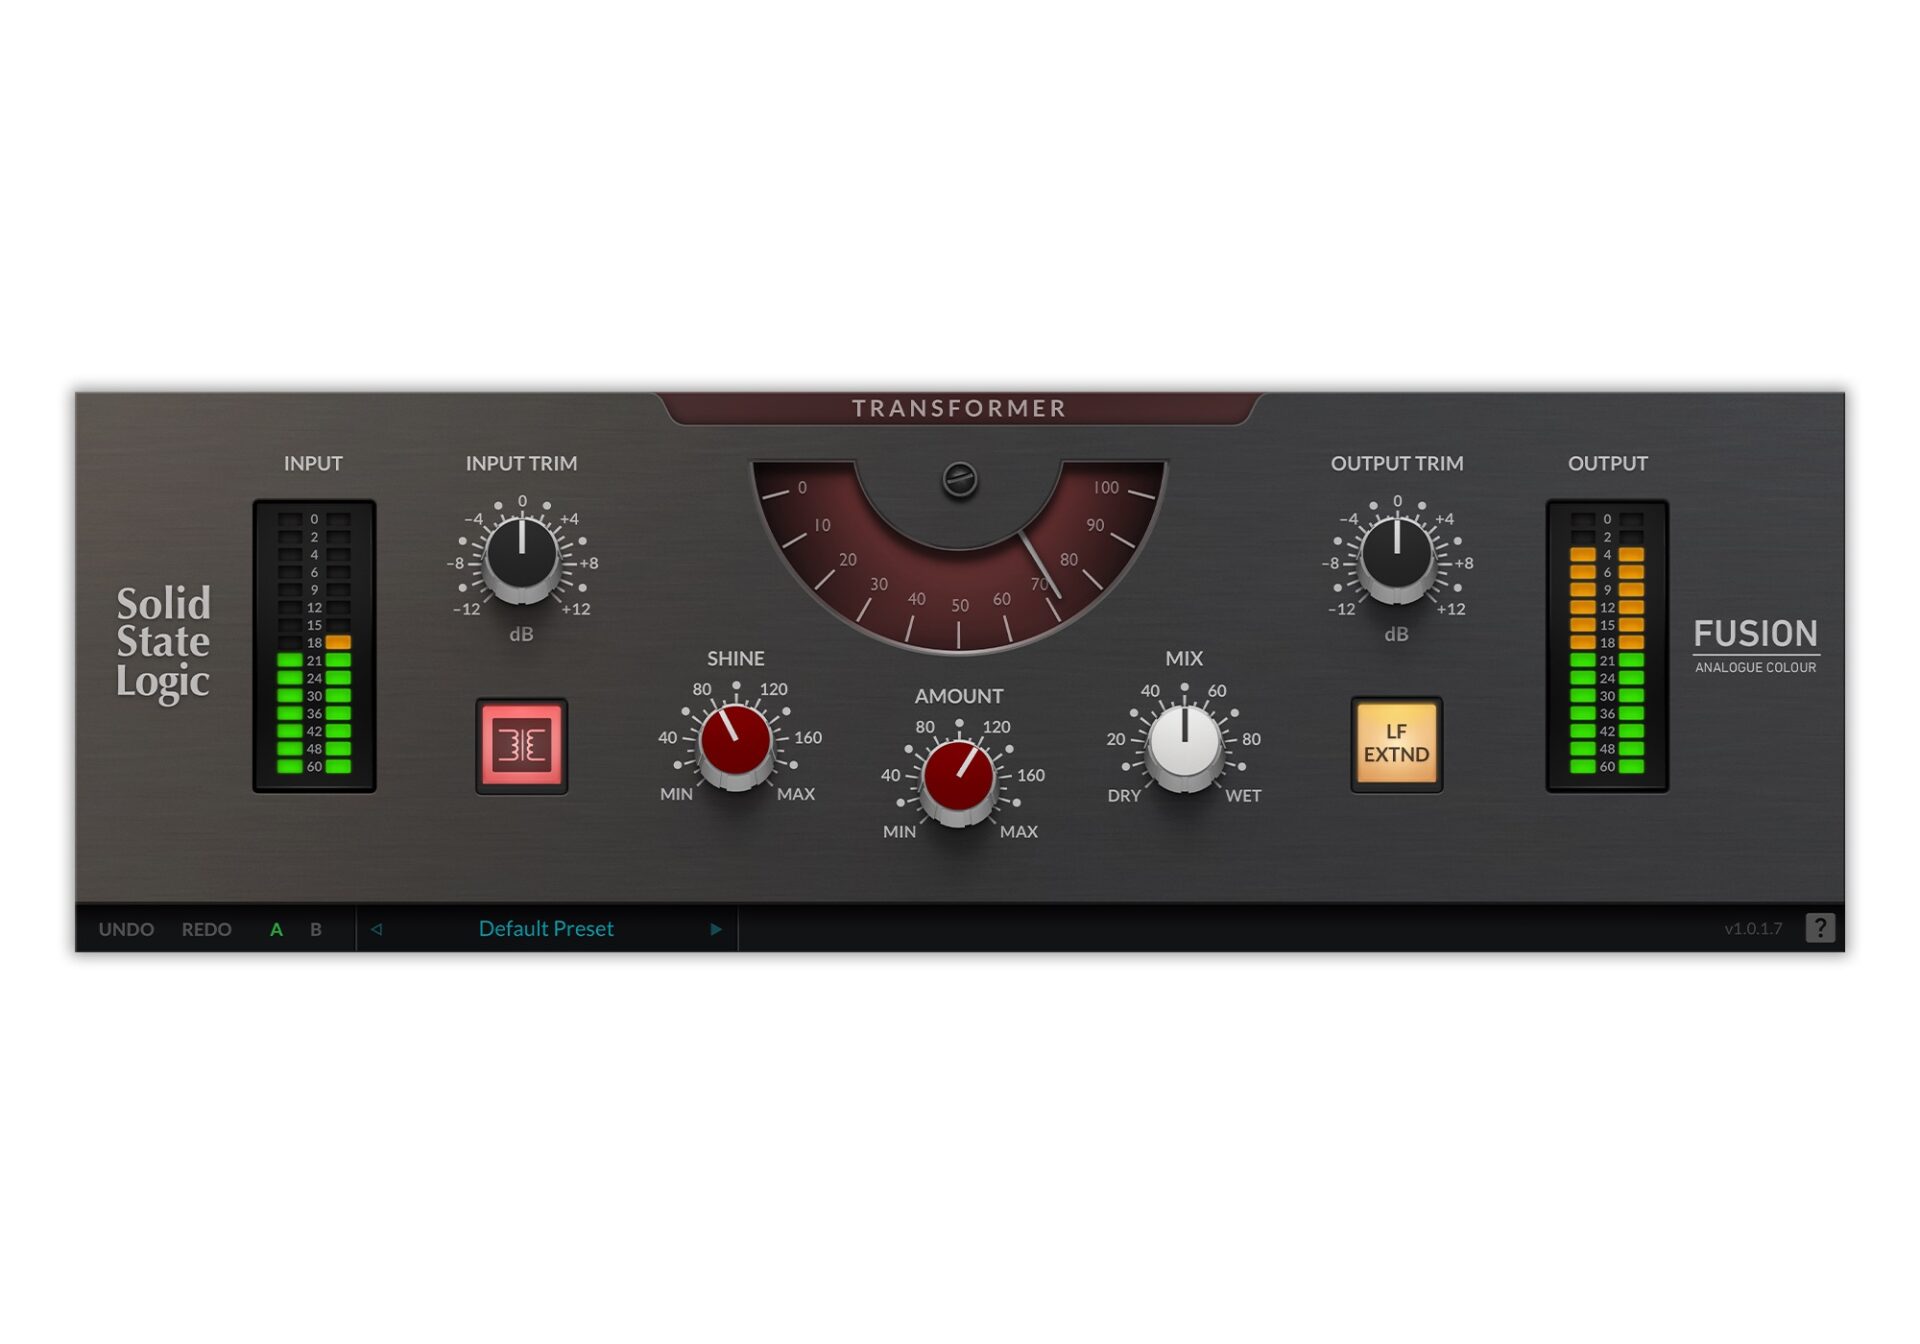 New Software Review: Fusion Transformer Plugin by SSL